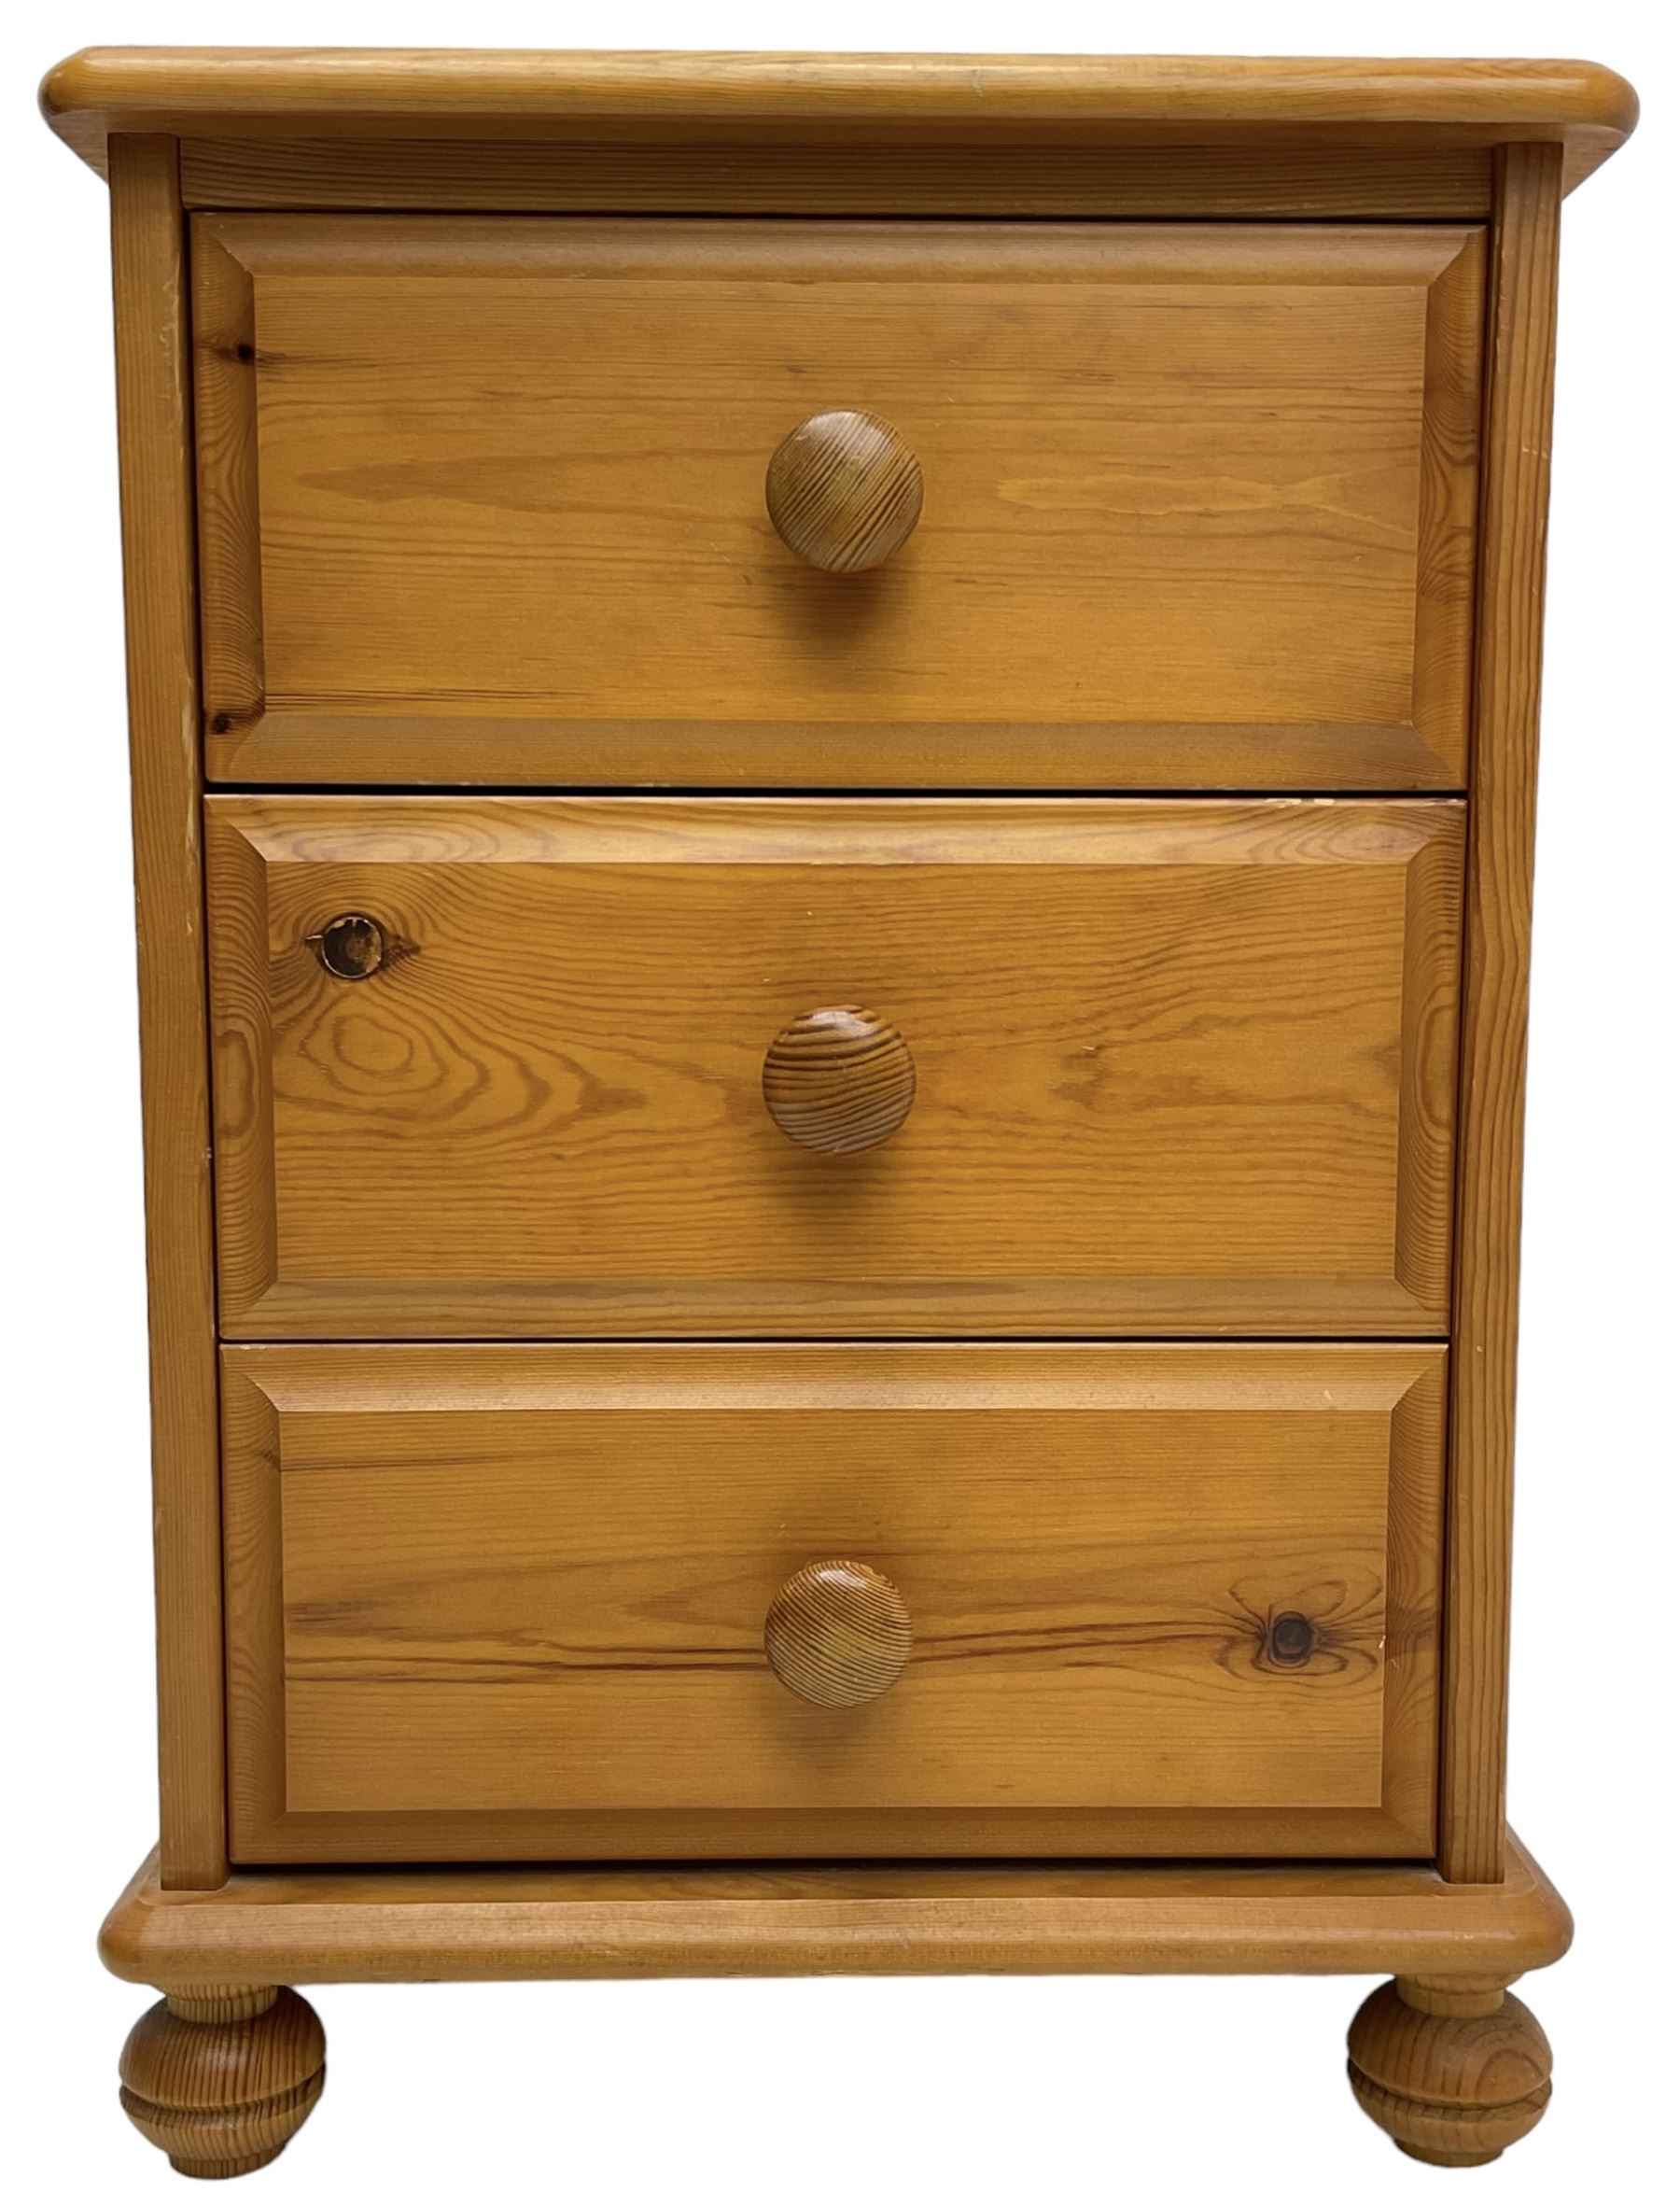 Polished pine chest - Image 6 of 12